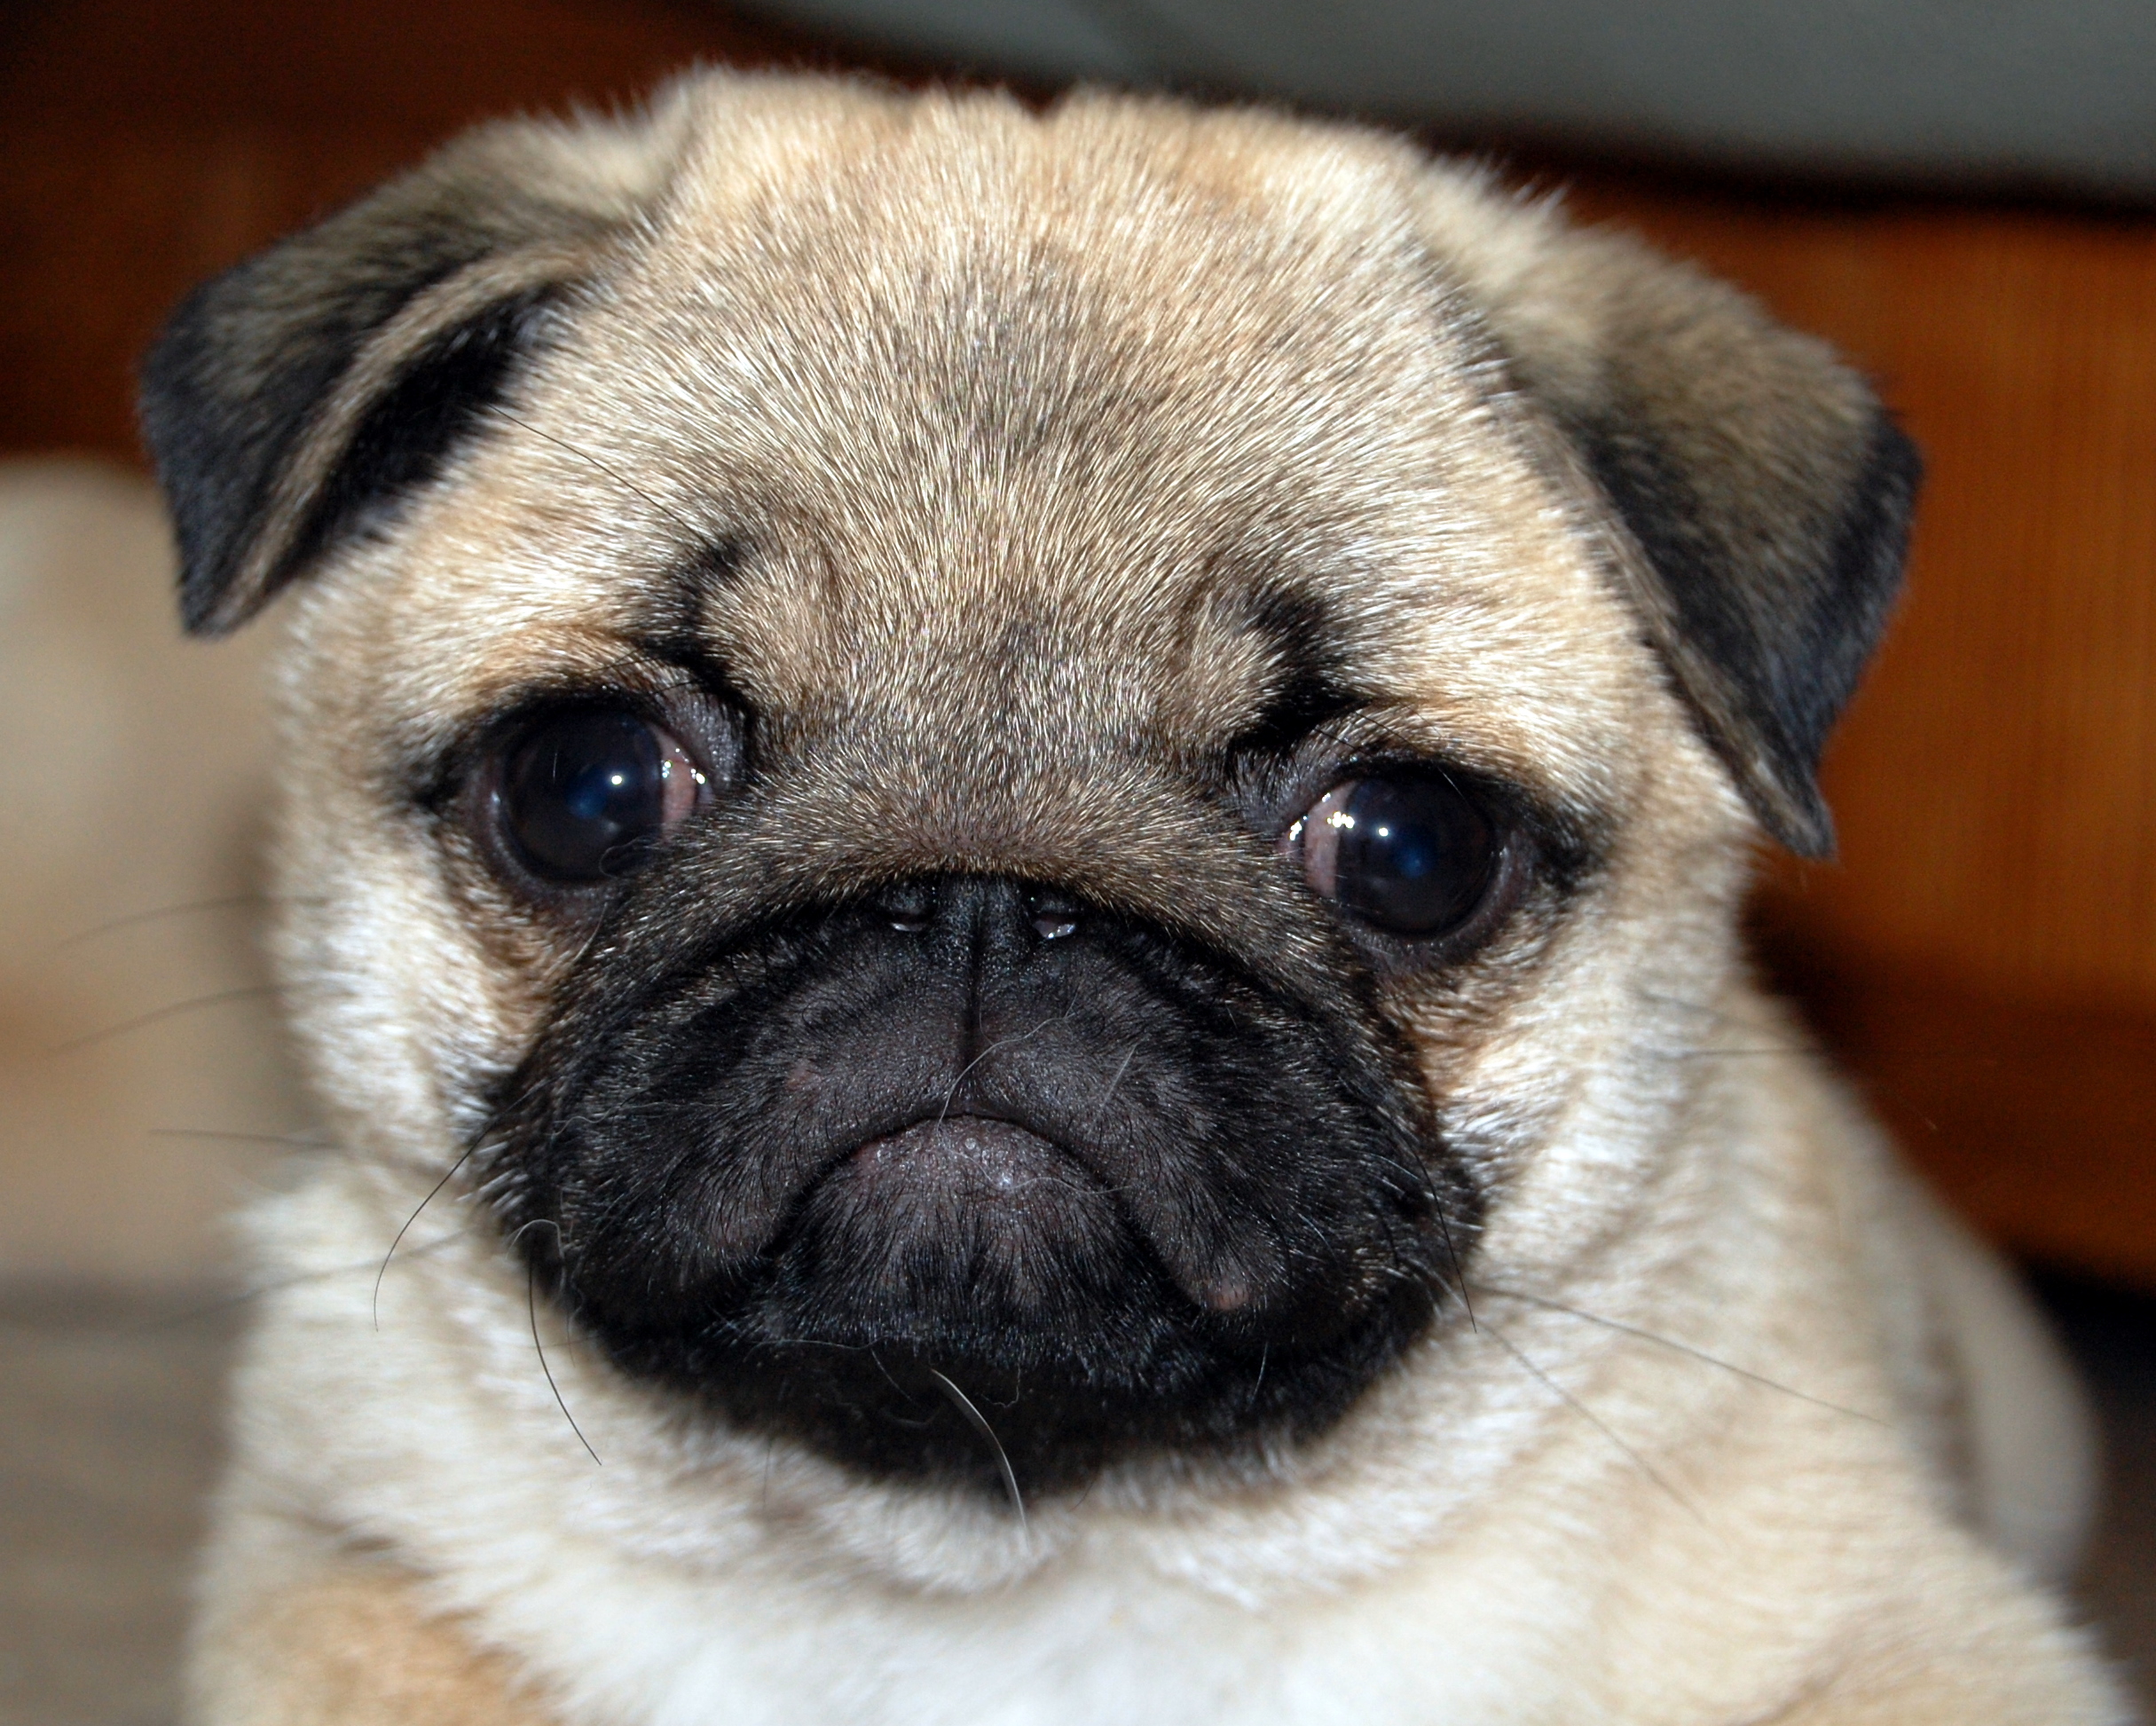 Pug Puppy Face Close Up Picture